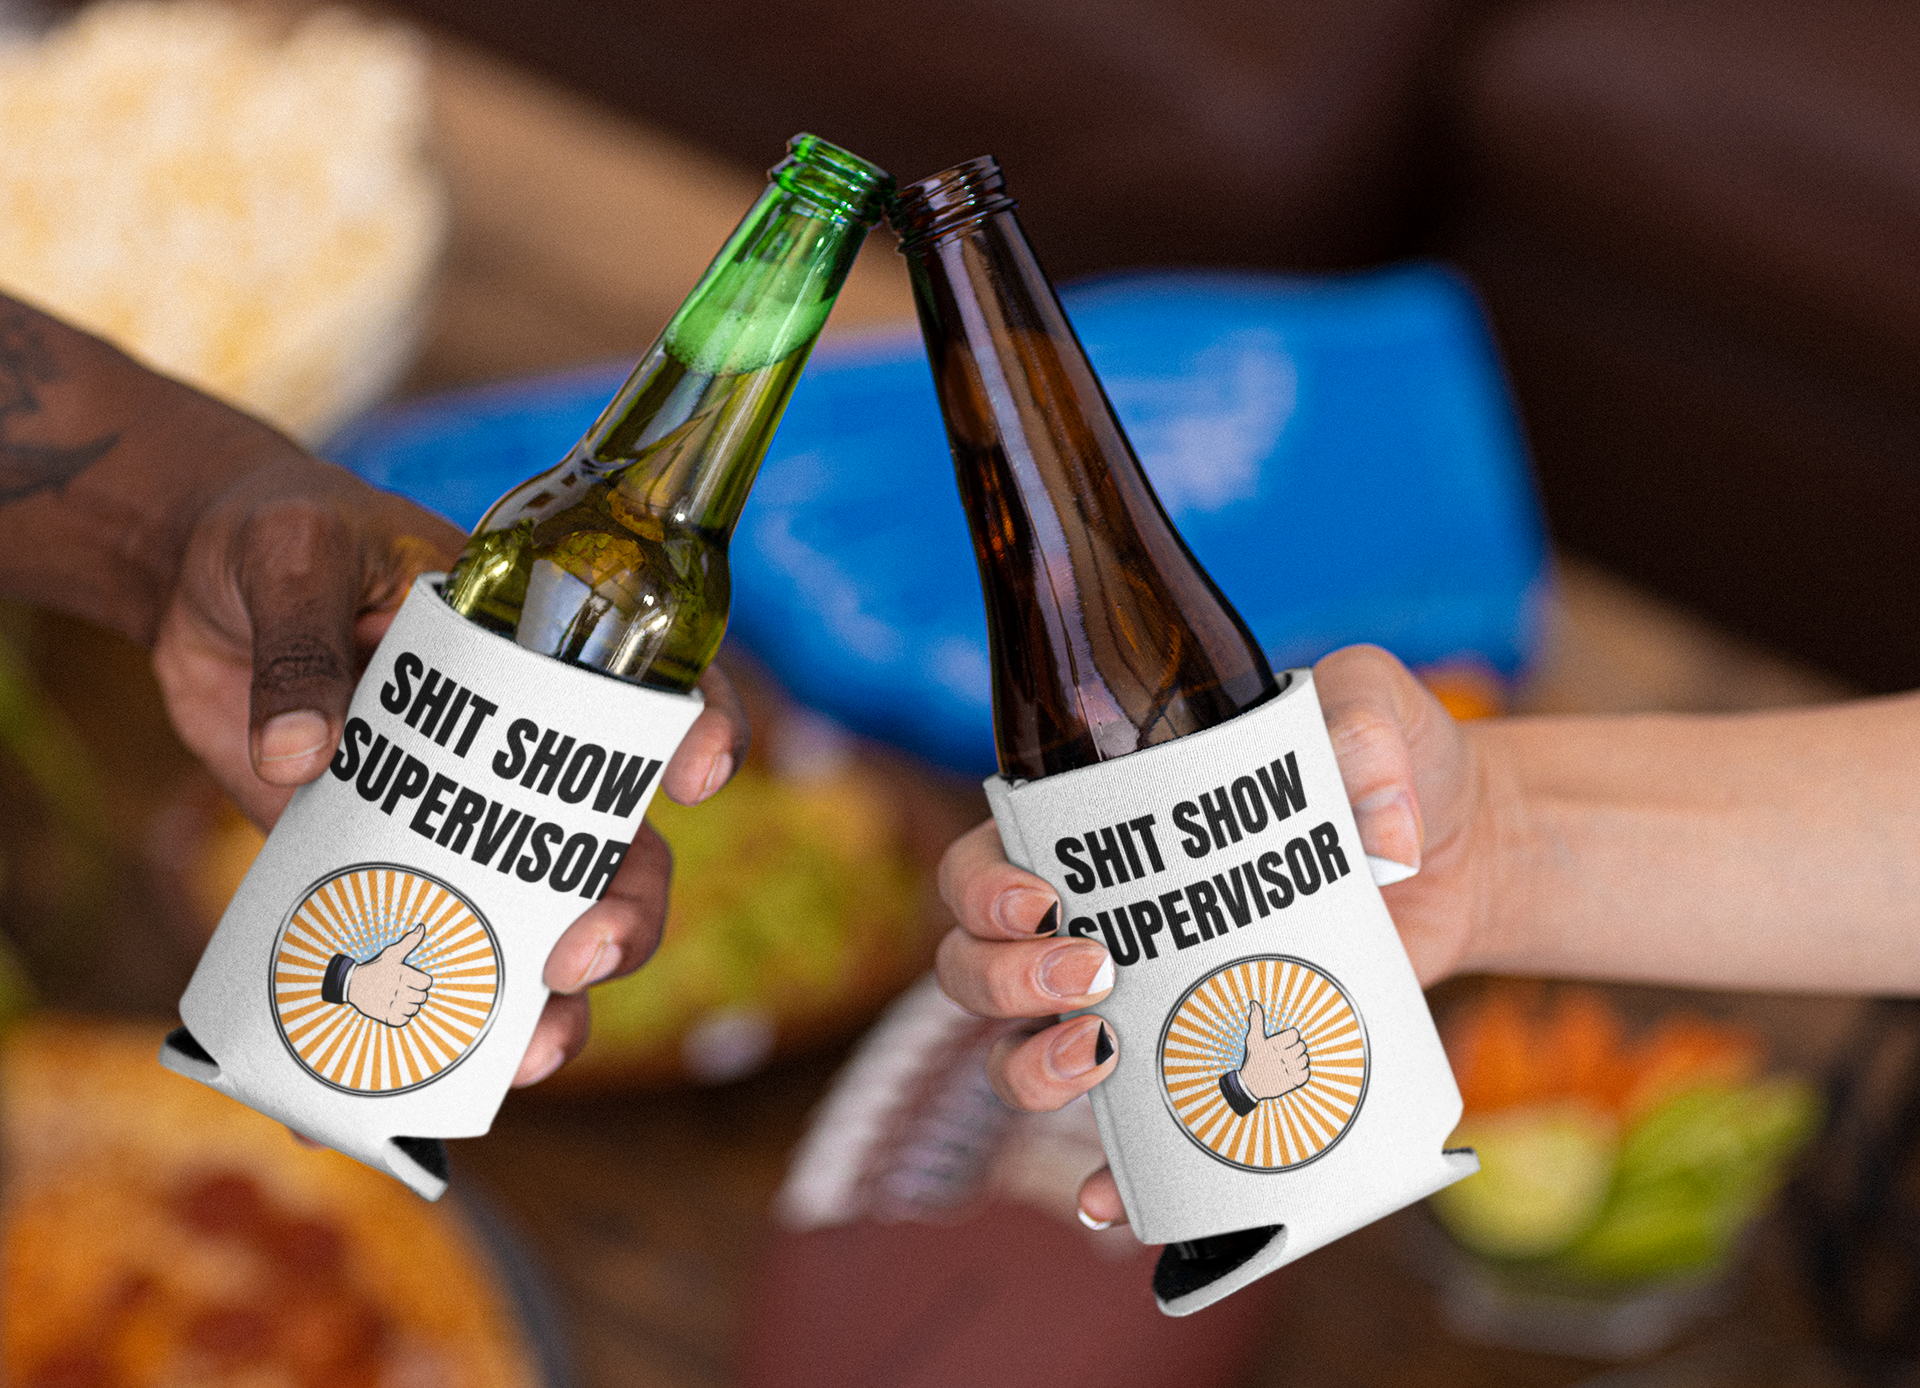 Shit show supervisor Can / bottle Coozie bottle cooler can cooler Christmas gift dads day gift gift for dad gift for grandpa gift for her gift for him gift for mom gift for sister gift for wife Koozie moms gift Unique gift